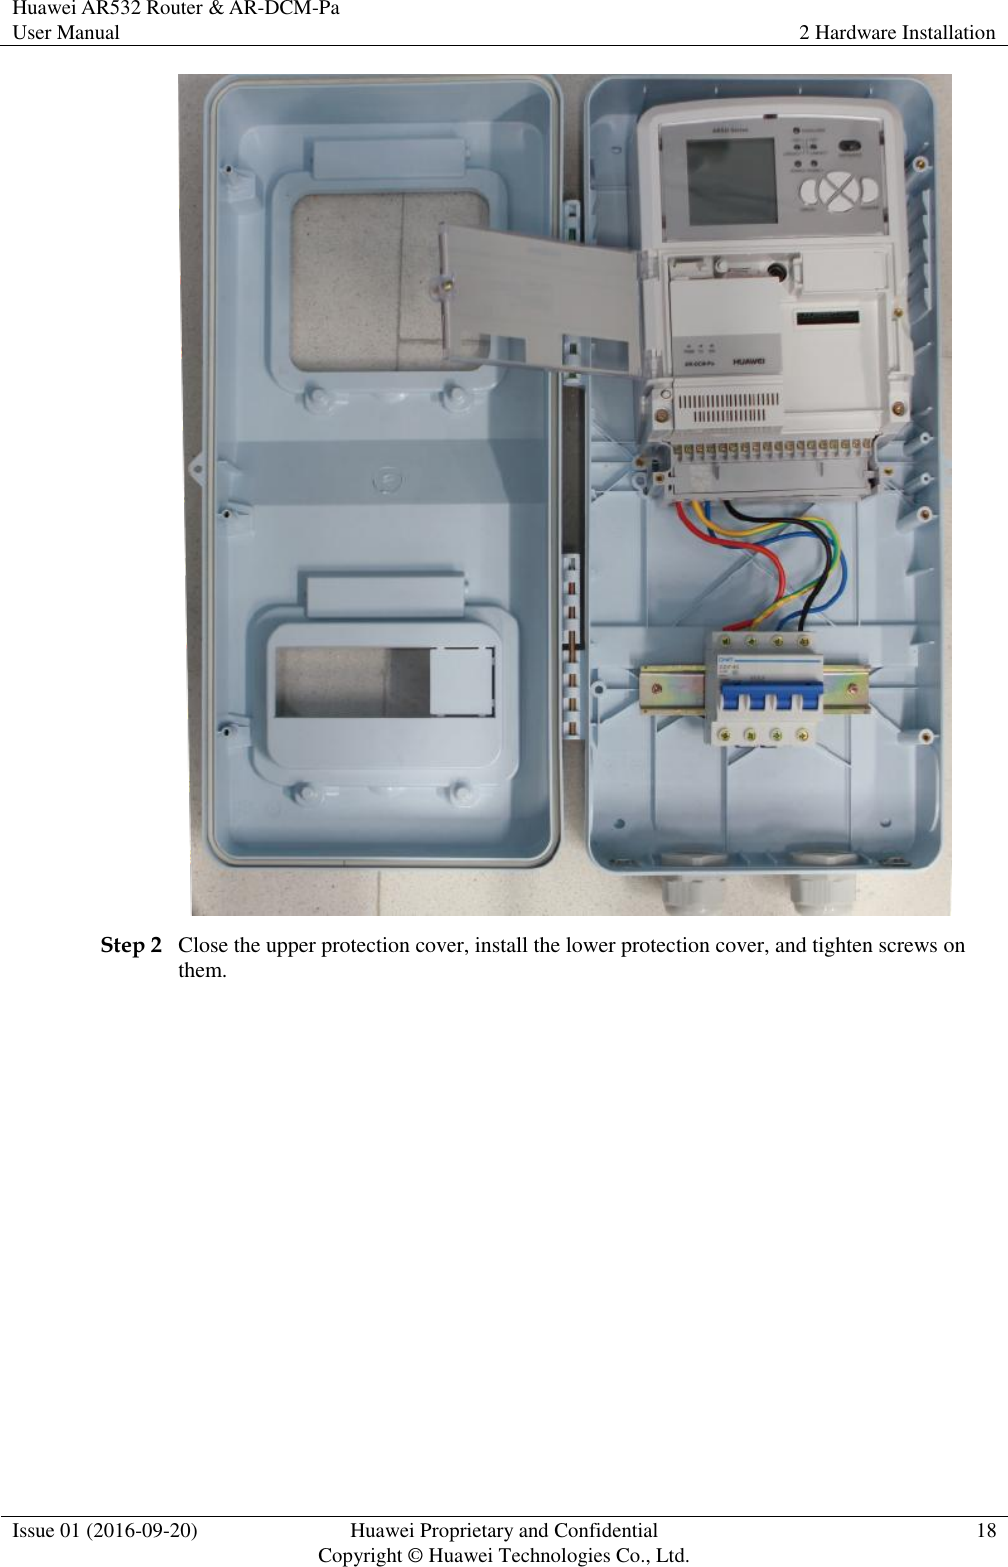 Huawei AR532 Router &amp; AR-DCM-Pa User Manual 2 Hardware Installation  Issue 01 (2016-09-20) Huawei Proprietary and Confidential                                     Copyright © Huawei Technologies Co., Ltd. 18   Step 2 Close the upper protection cover, install the lower protection cover, and tighten screws on them. 